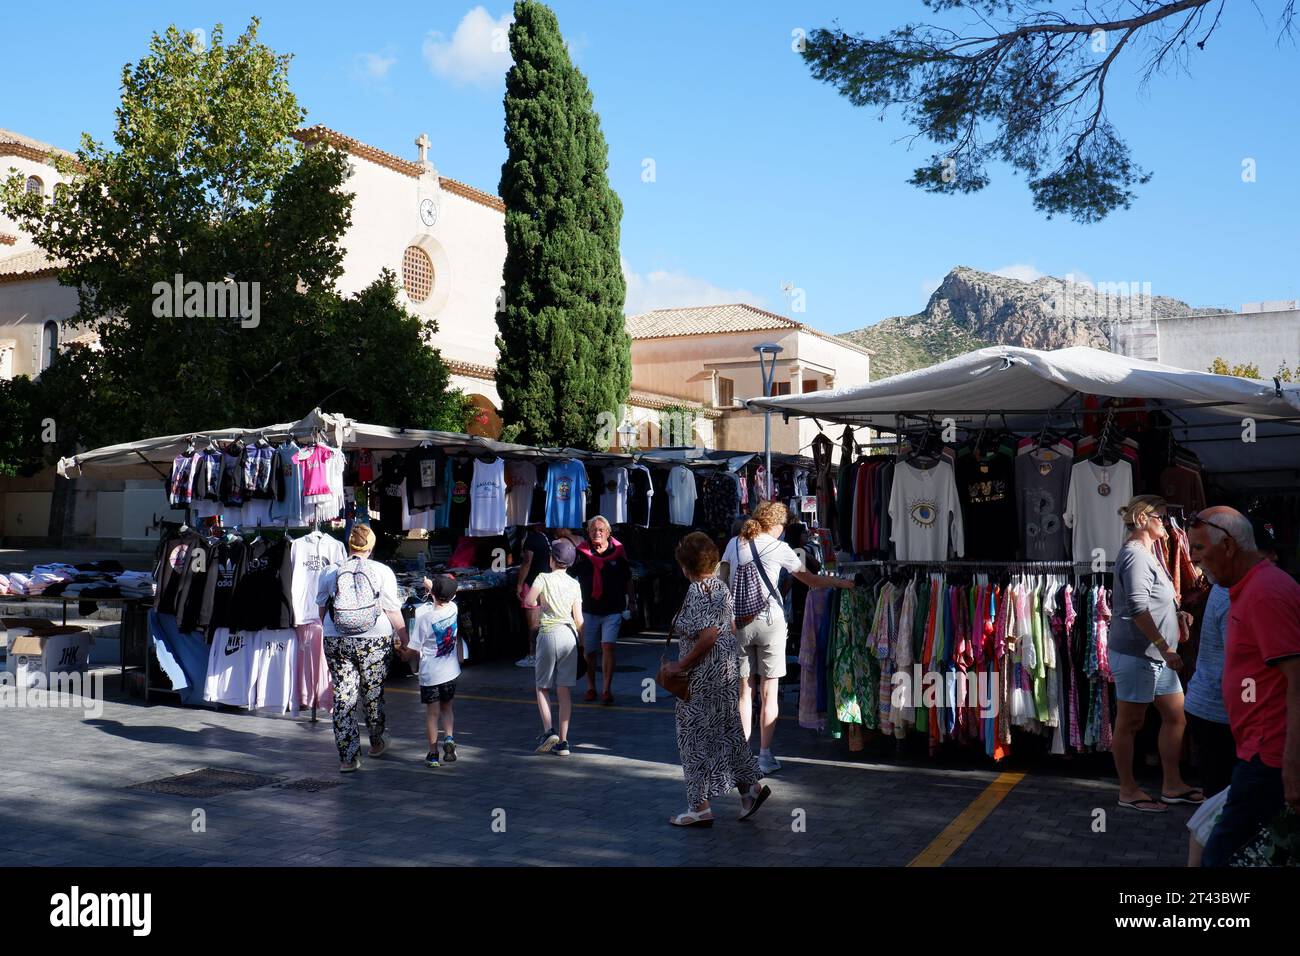 The weekly market held every Wednesday in the main square (Plaça Miguel Capllonch) at Port de Pollenca, Mallorca Puerto Pollenca Stock Photo